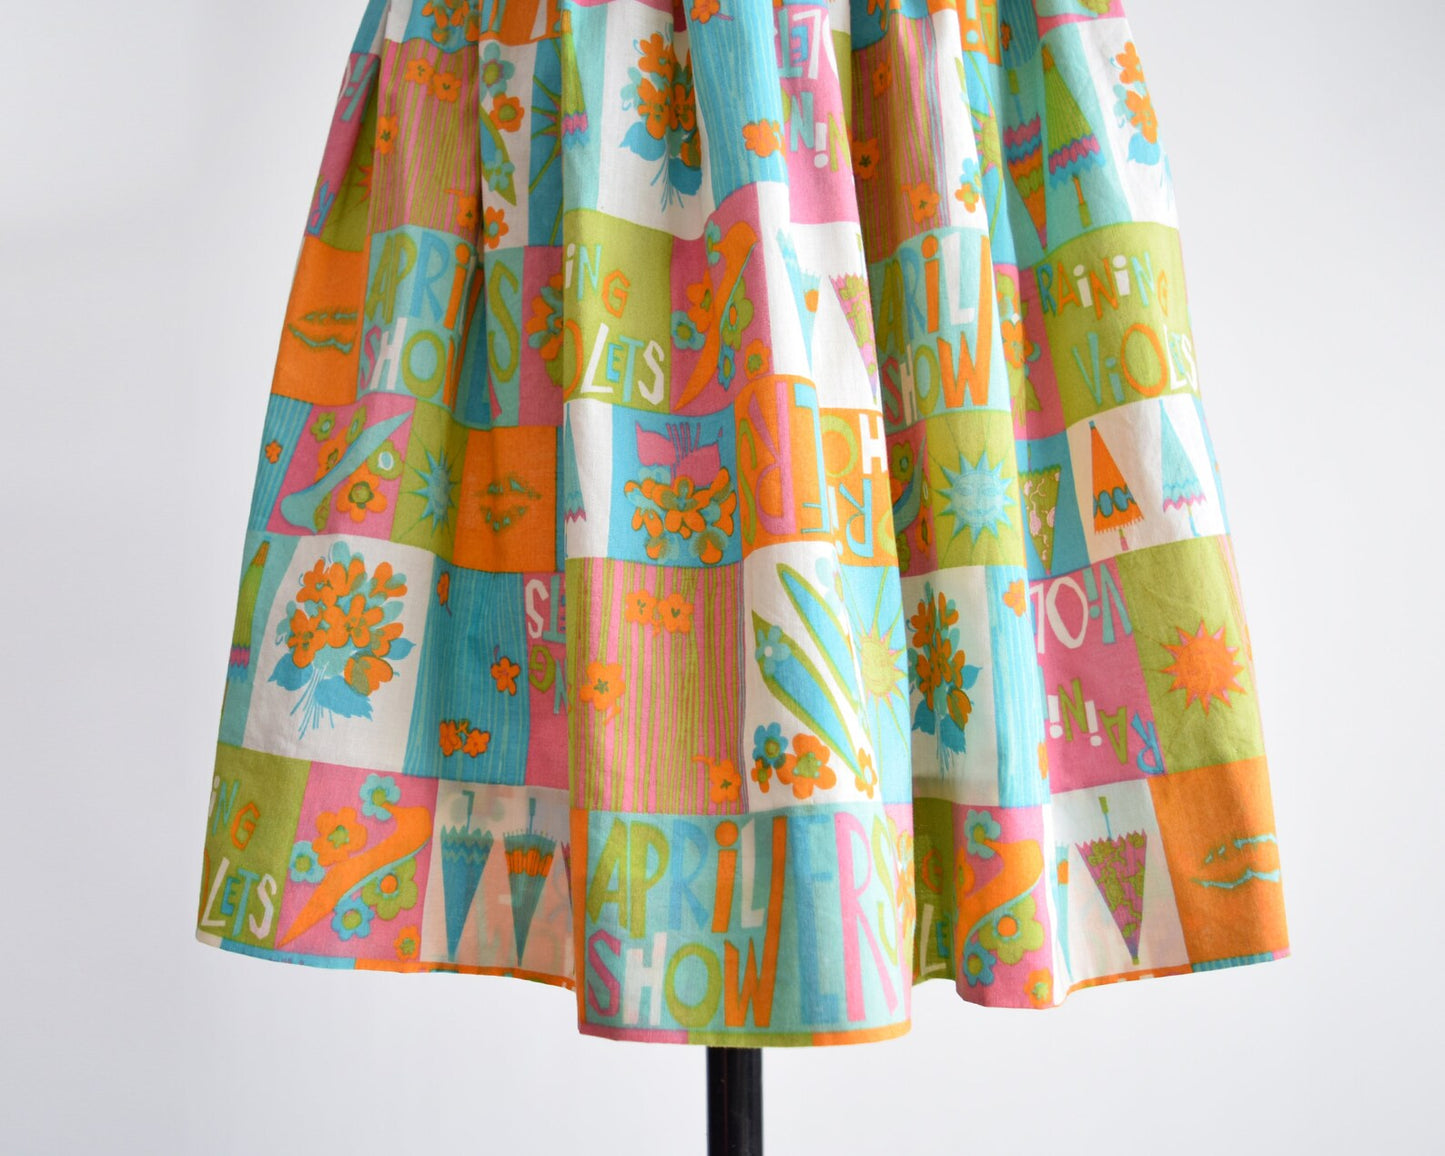 Close up print that has an April showers theme with colorful blocks of flowers, umbrellas, shoes, the sun, and the words April Showers and Raining Violets in a classic mid century print. Skirt is modeled on a dress form